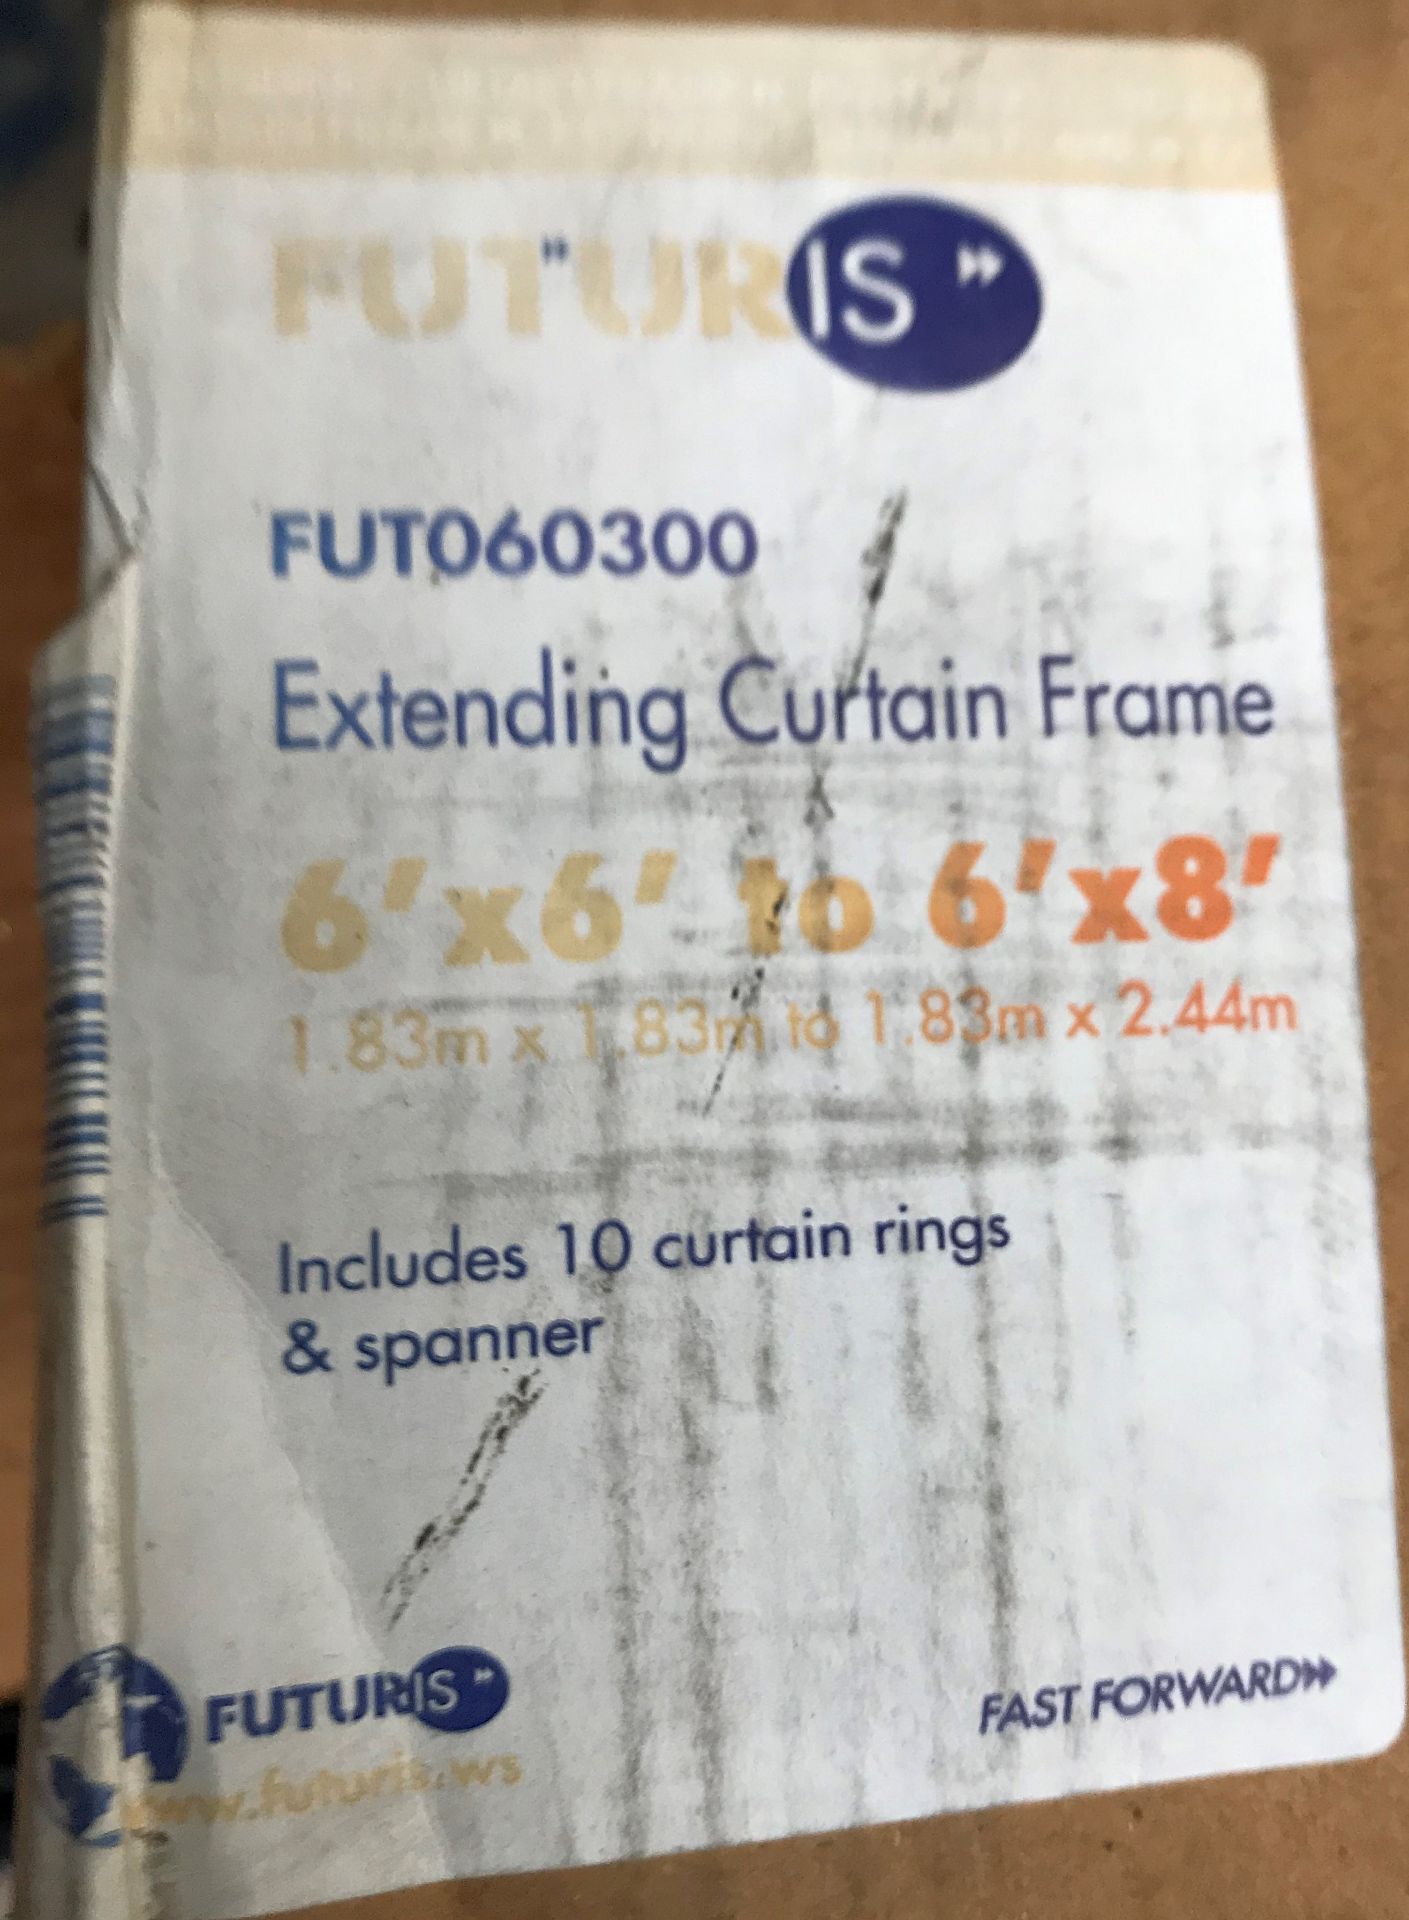 A Futuris FUT060300 Extending Curtain Frame, 6ft x 6ft to 6ft x 8ft with curtain. - Image 2 of 2